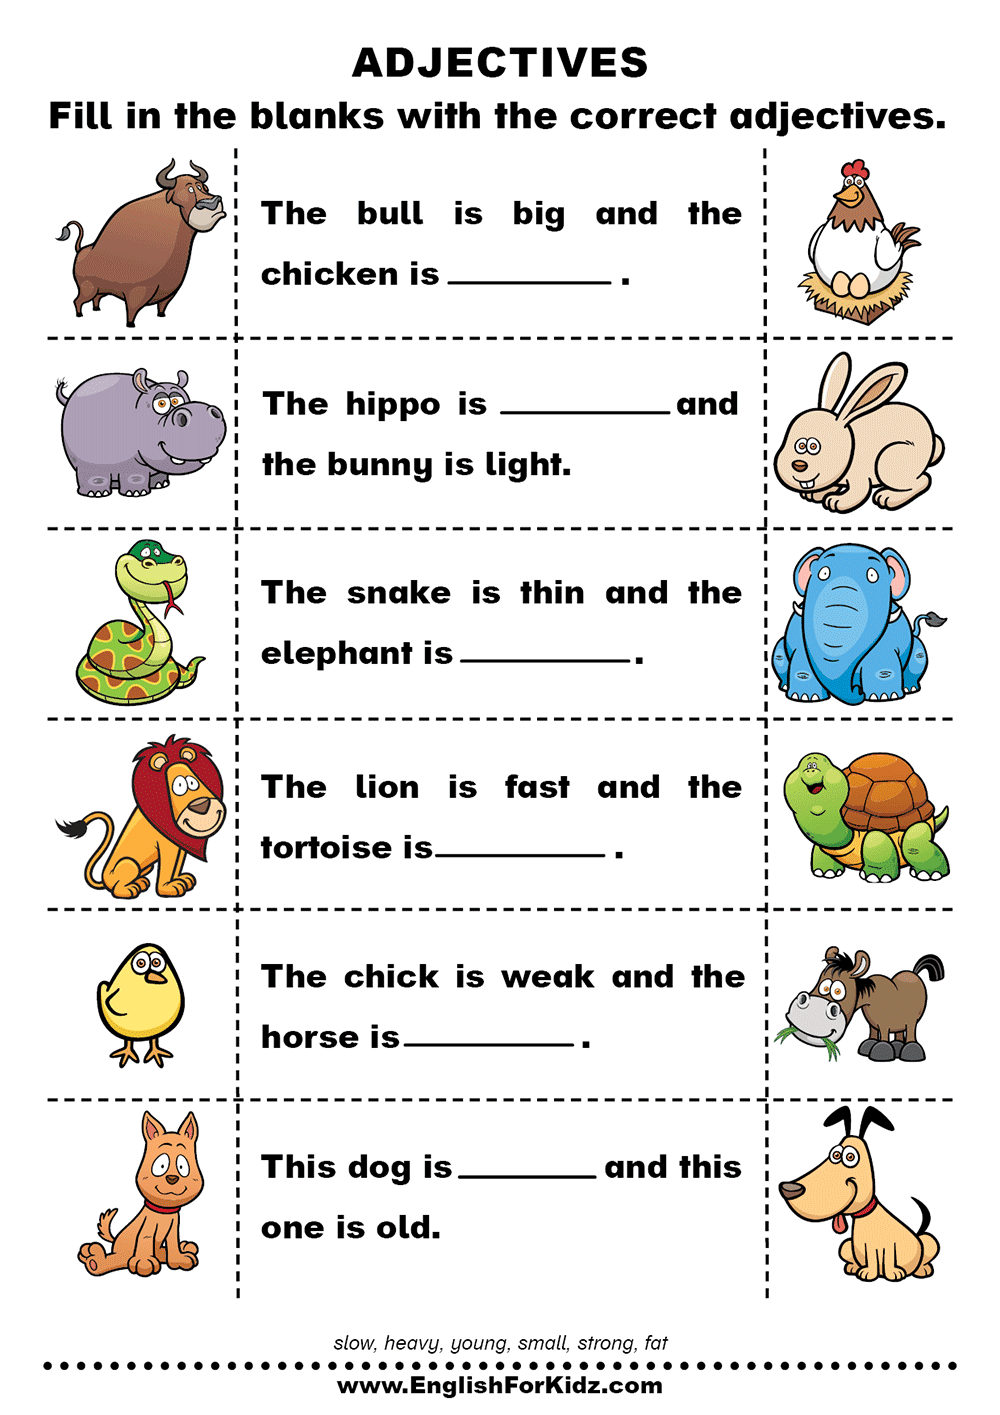 adjectives-worksheets-and-exercises